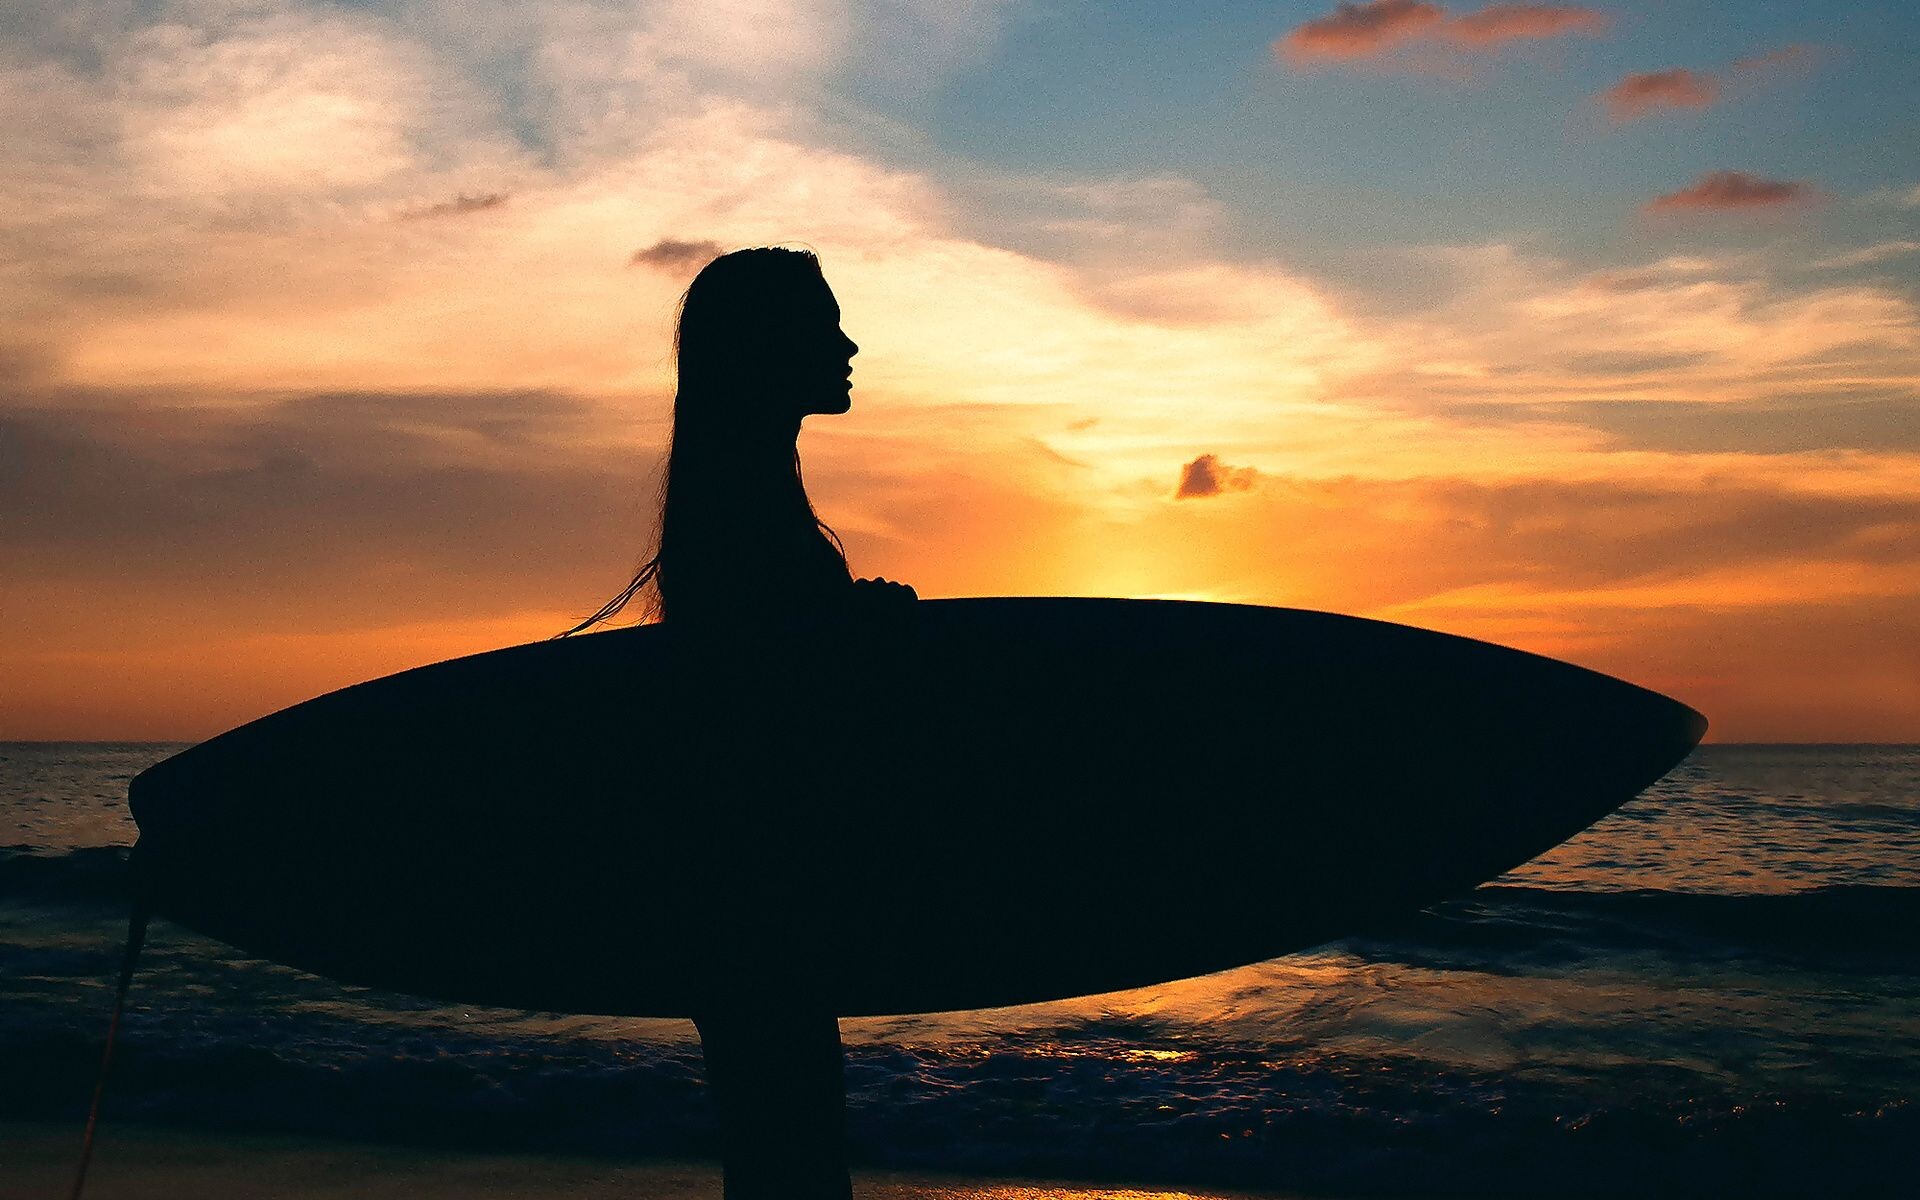 Girl Surfing: Outdoor vacation activity, Riding the waves off the shore at sunset, Surfboards for women. 1920x1200 HD Wallpaper.